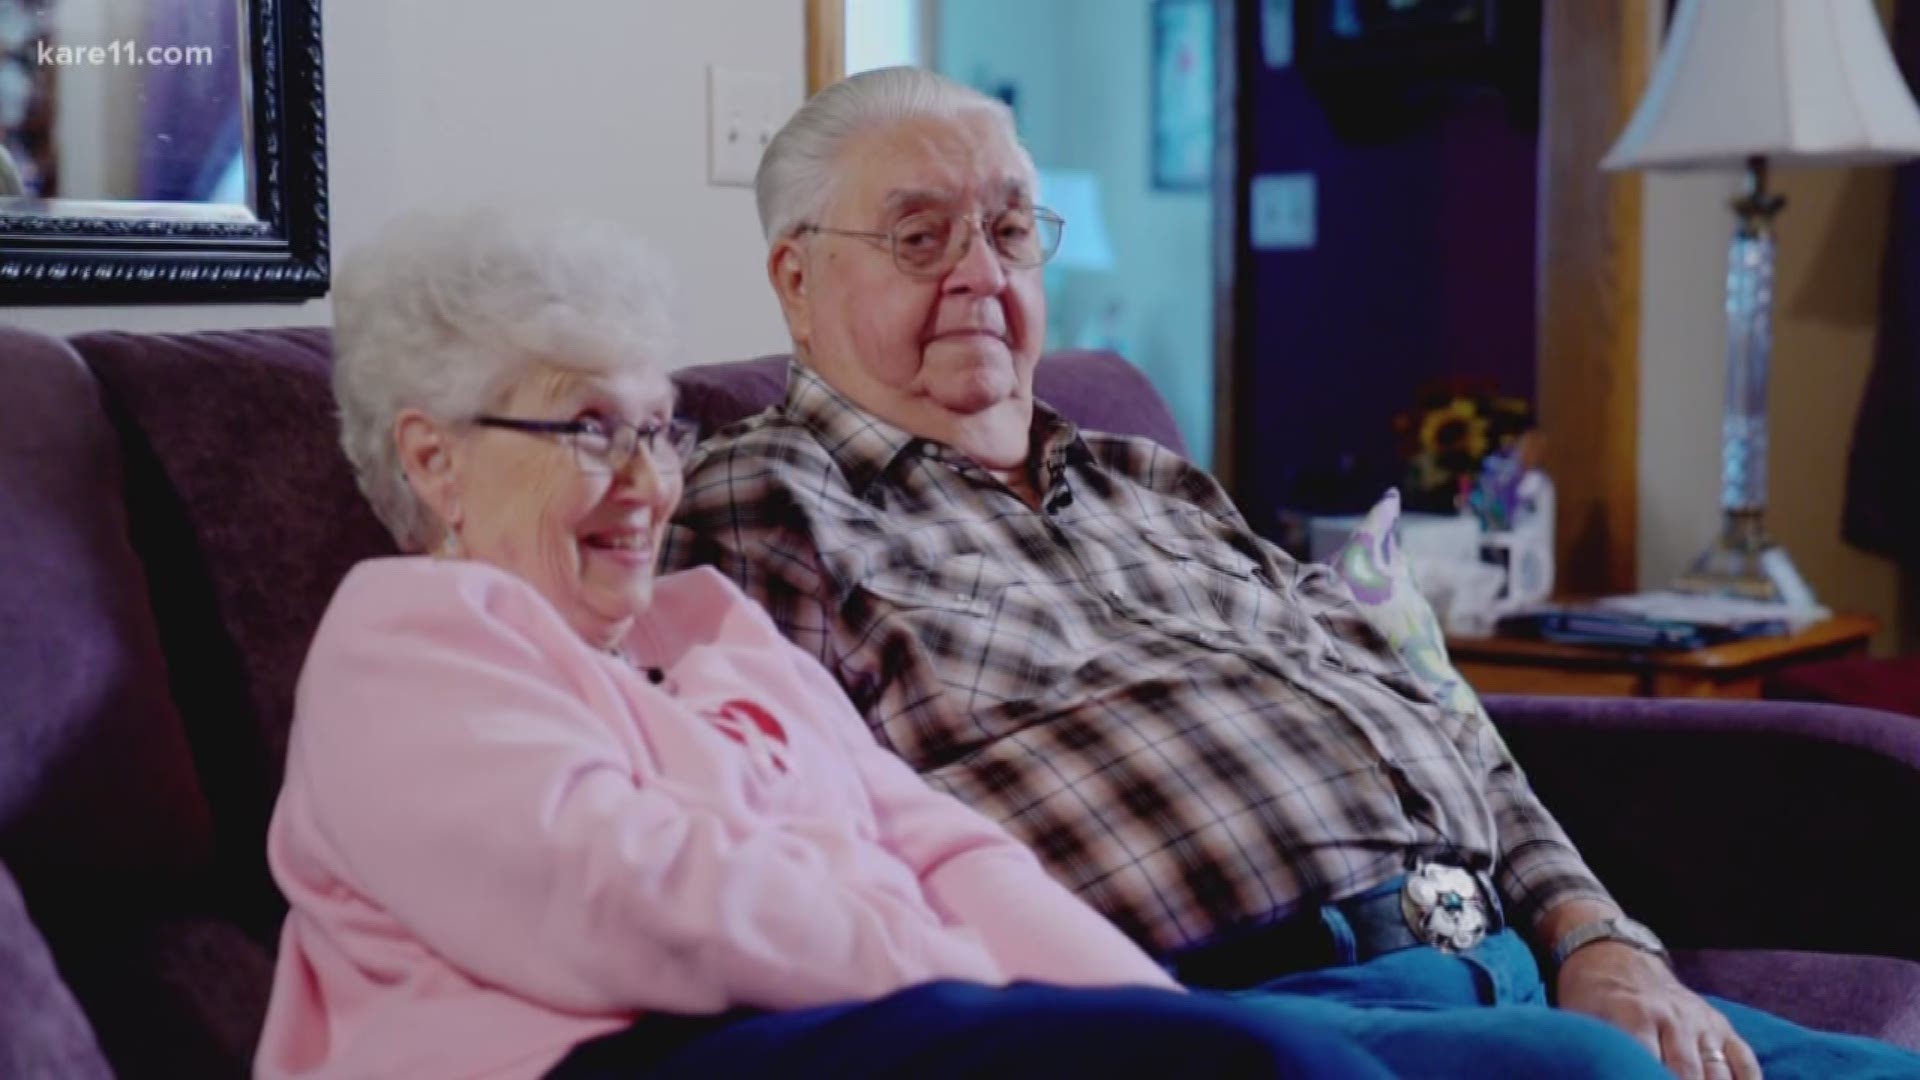 More than six decades after calling off her engagement, a Minnesota great-grandmother has wed the boyfriend she once rebuffed.